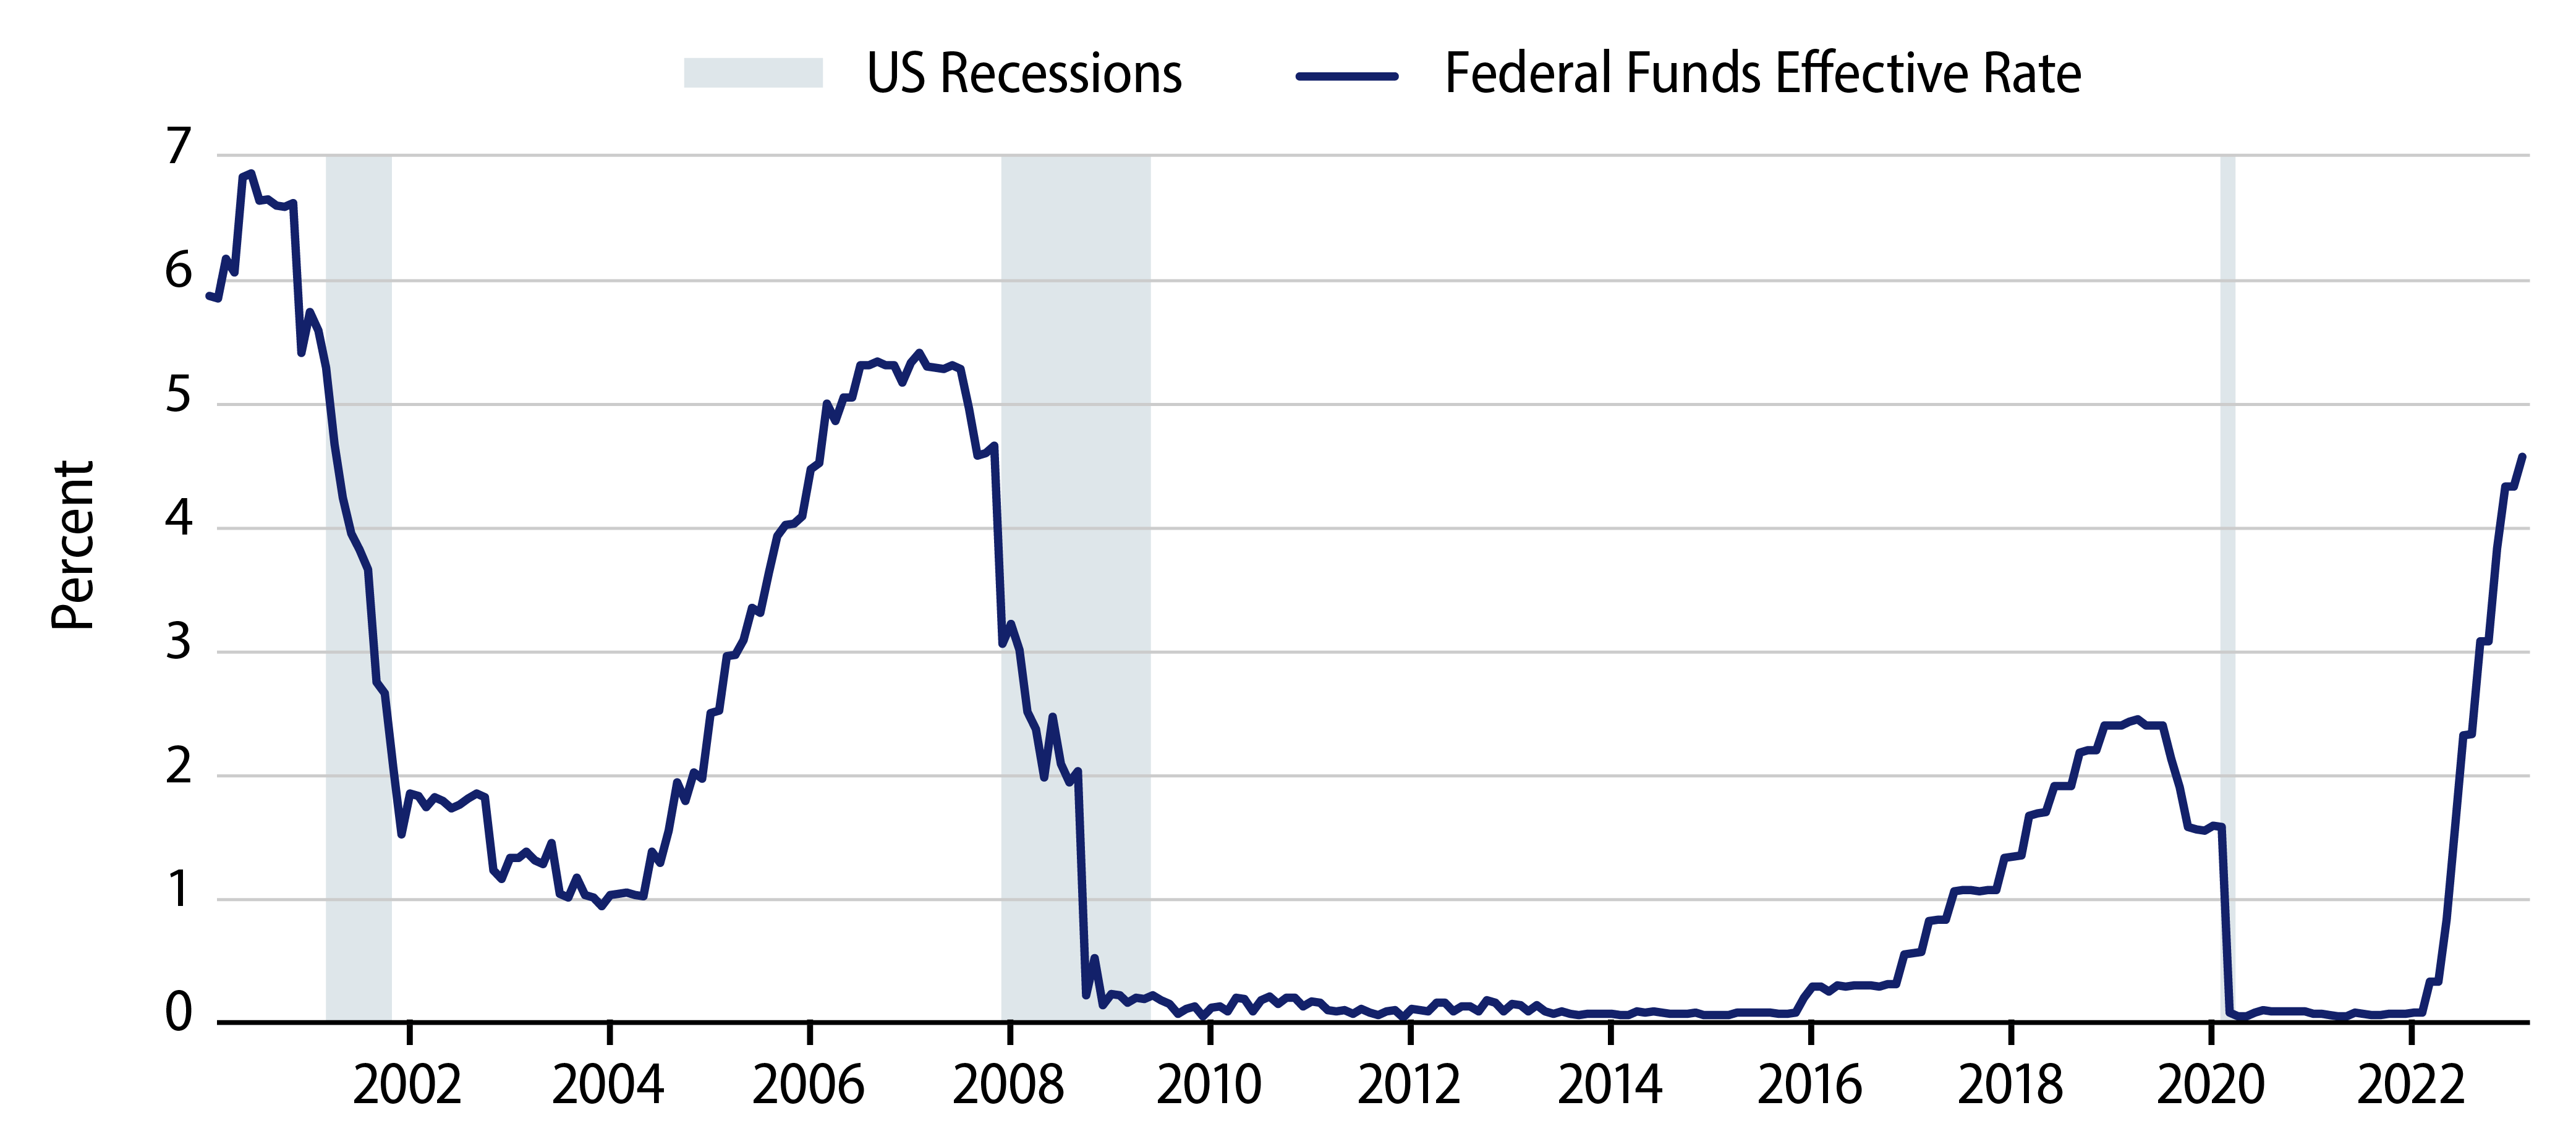 Recessions Have Followed the Three Prior Hiking Cycles, Leading the Fed to Rapidly Cut Policy Rates